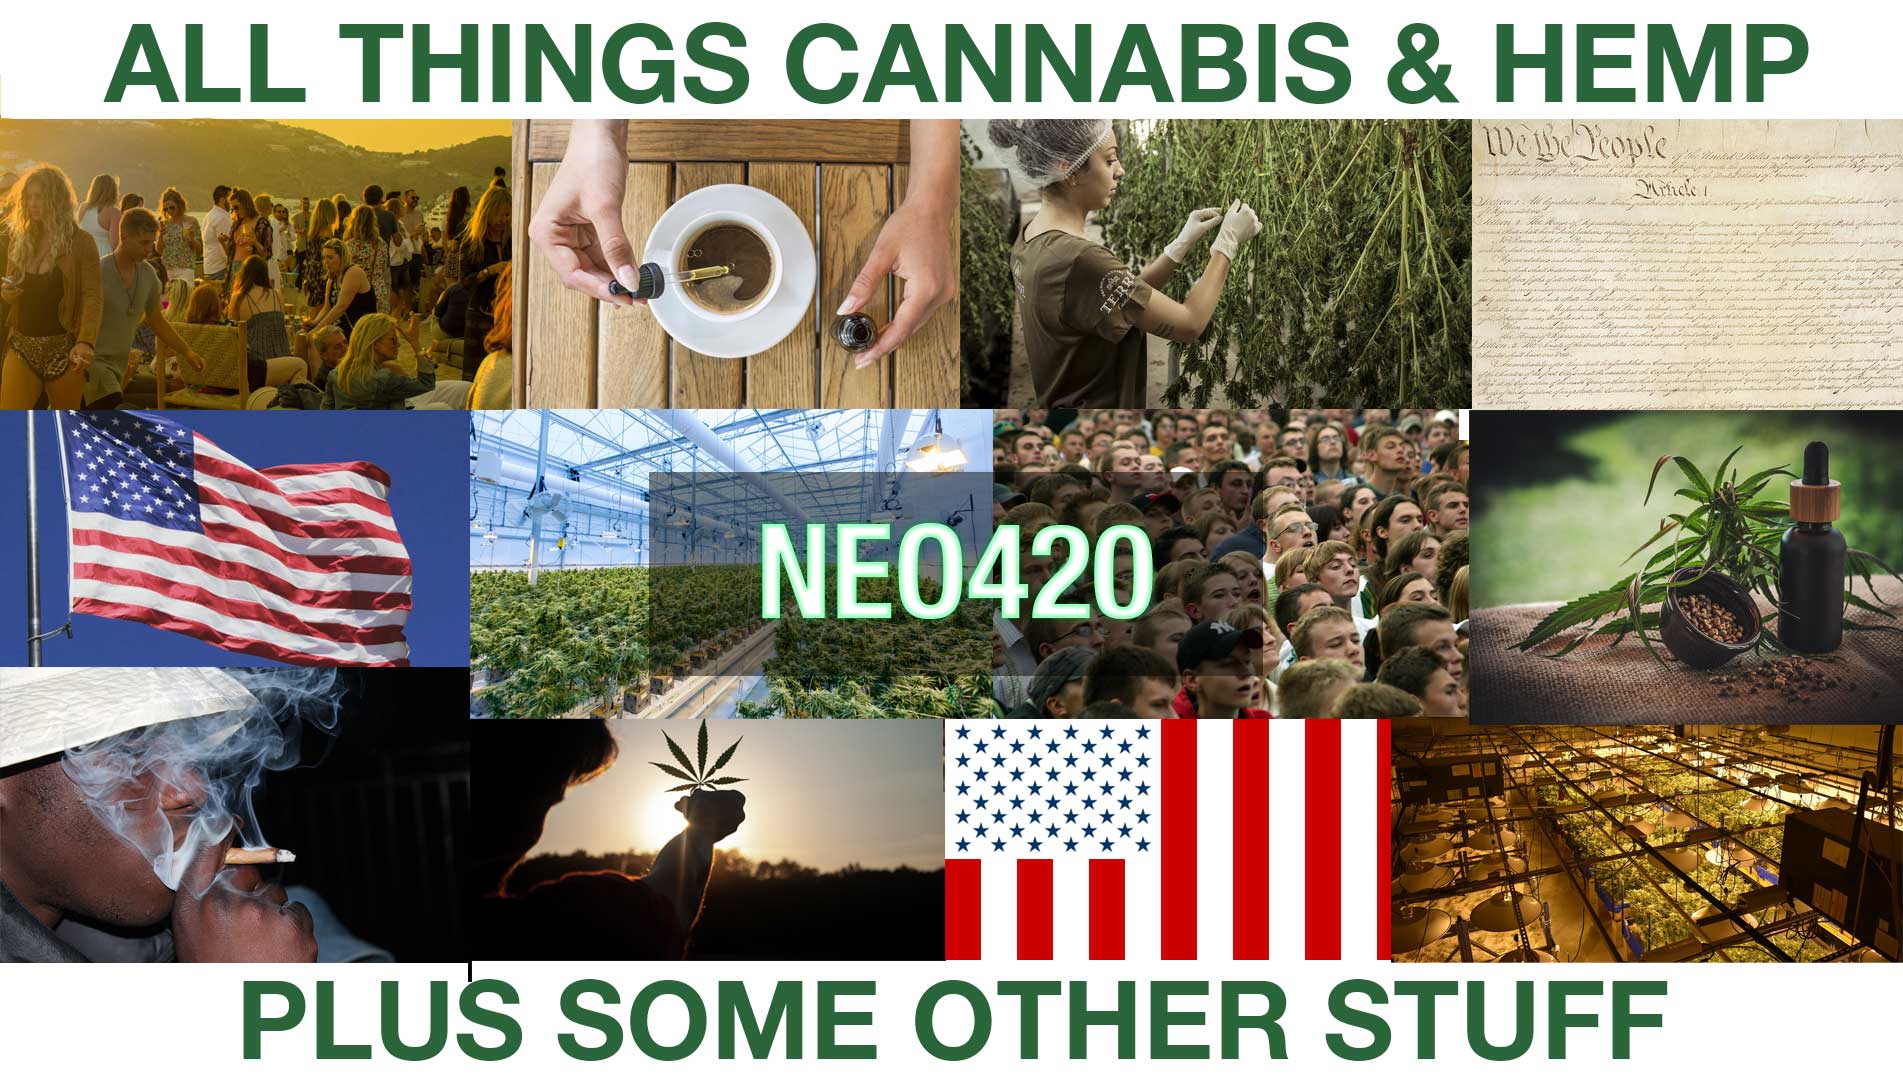 NEO420 - All things Cannabis & Hemp plus some other things